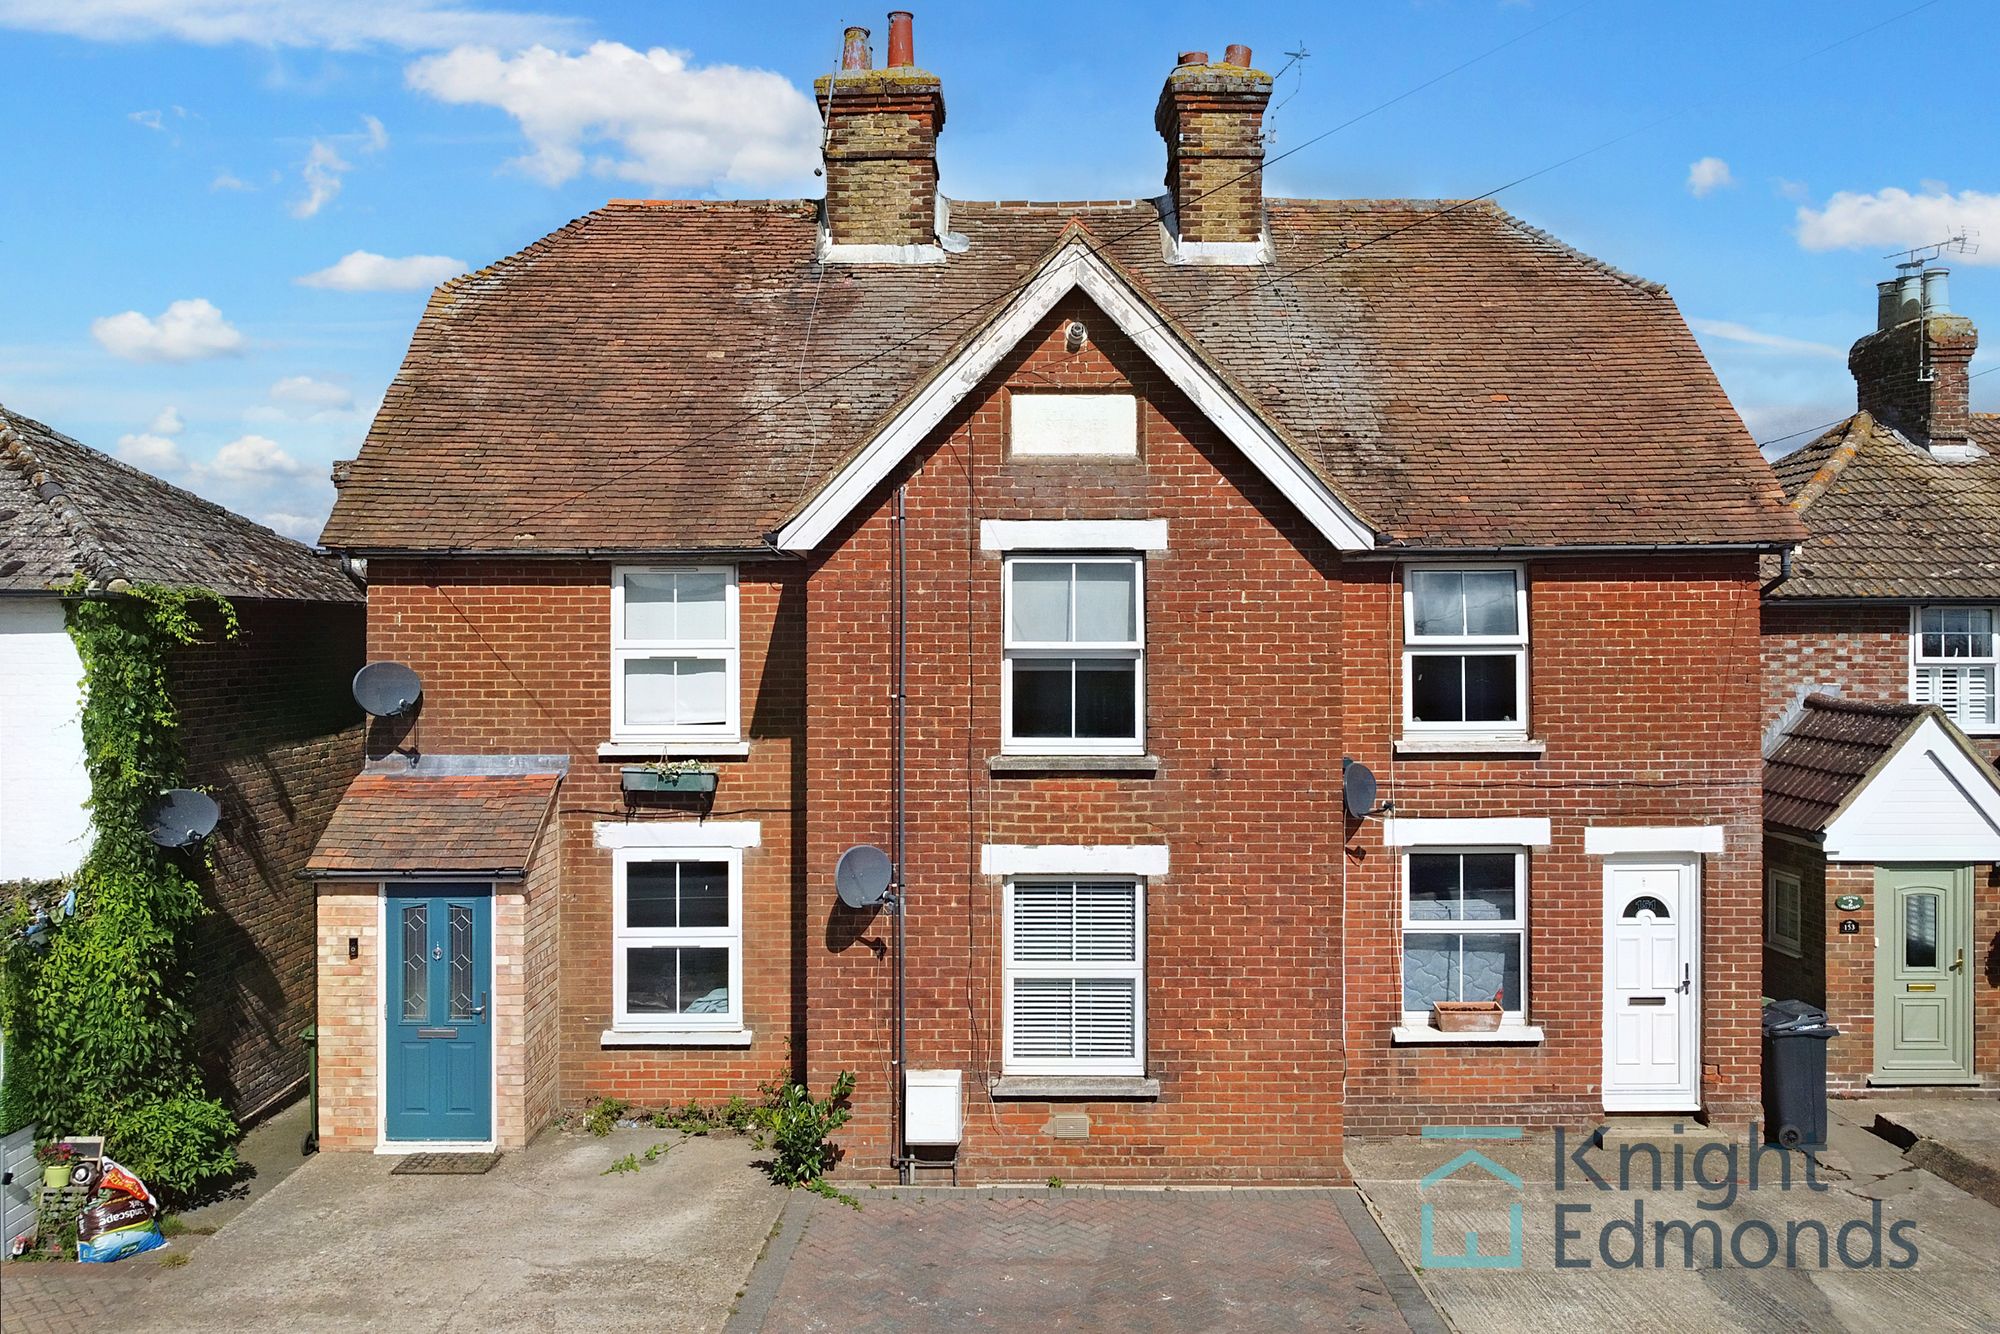 2 bed mid-terraced house for sale in Heath Road, Maidstone, ME17